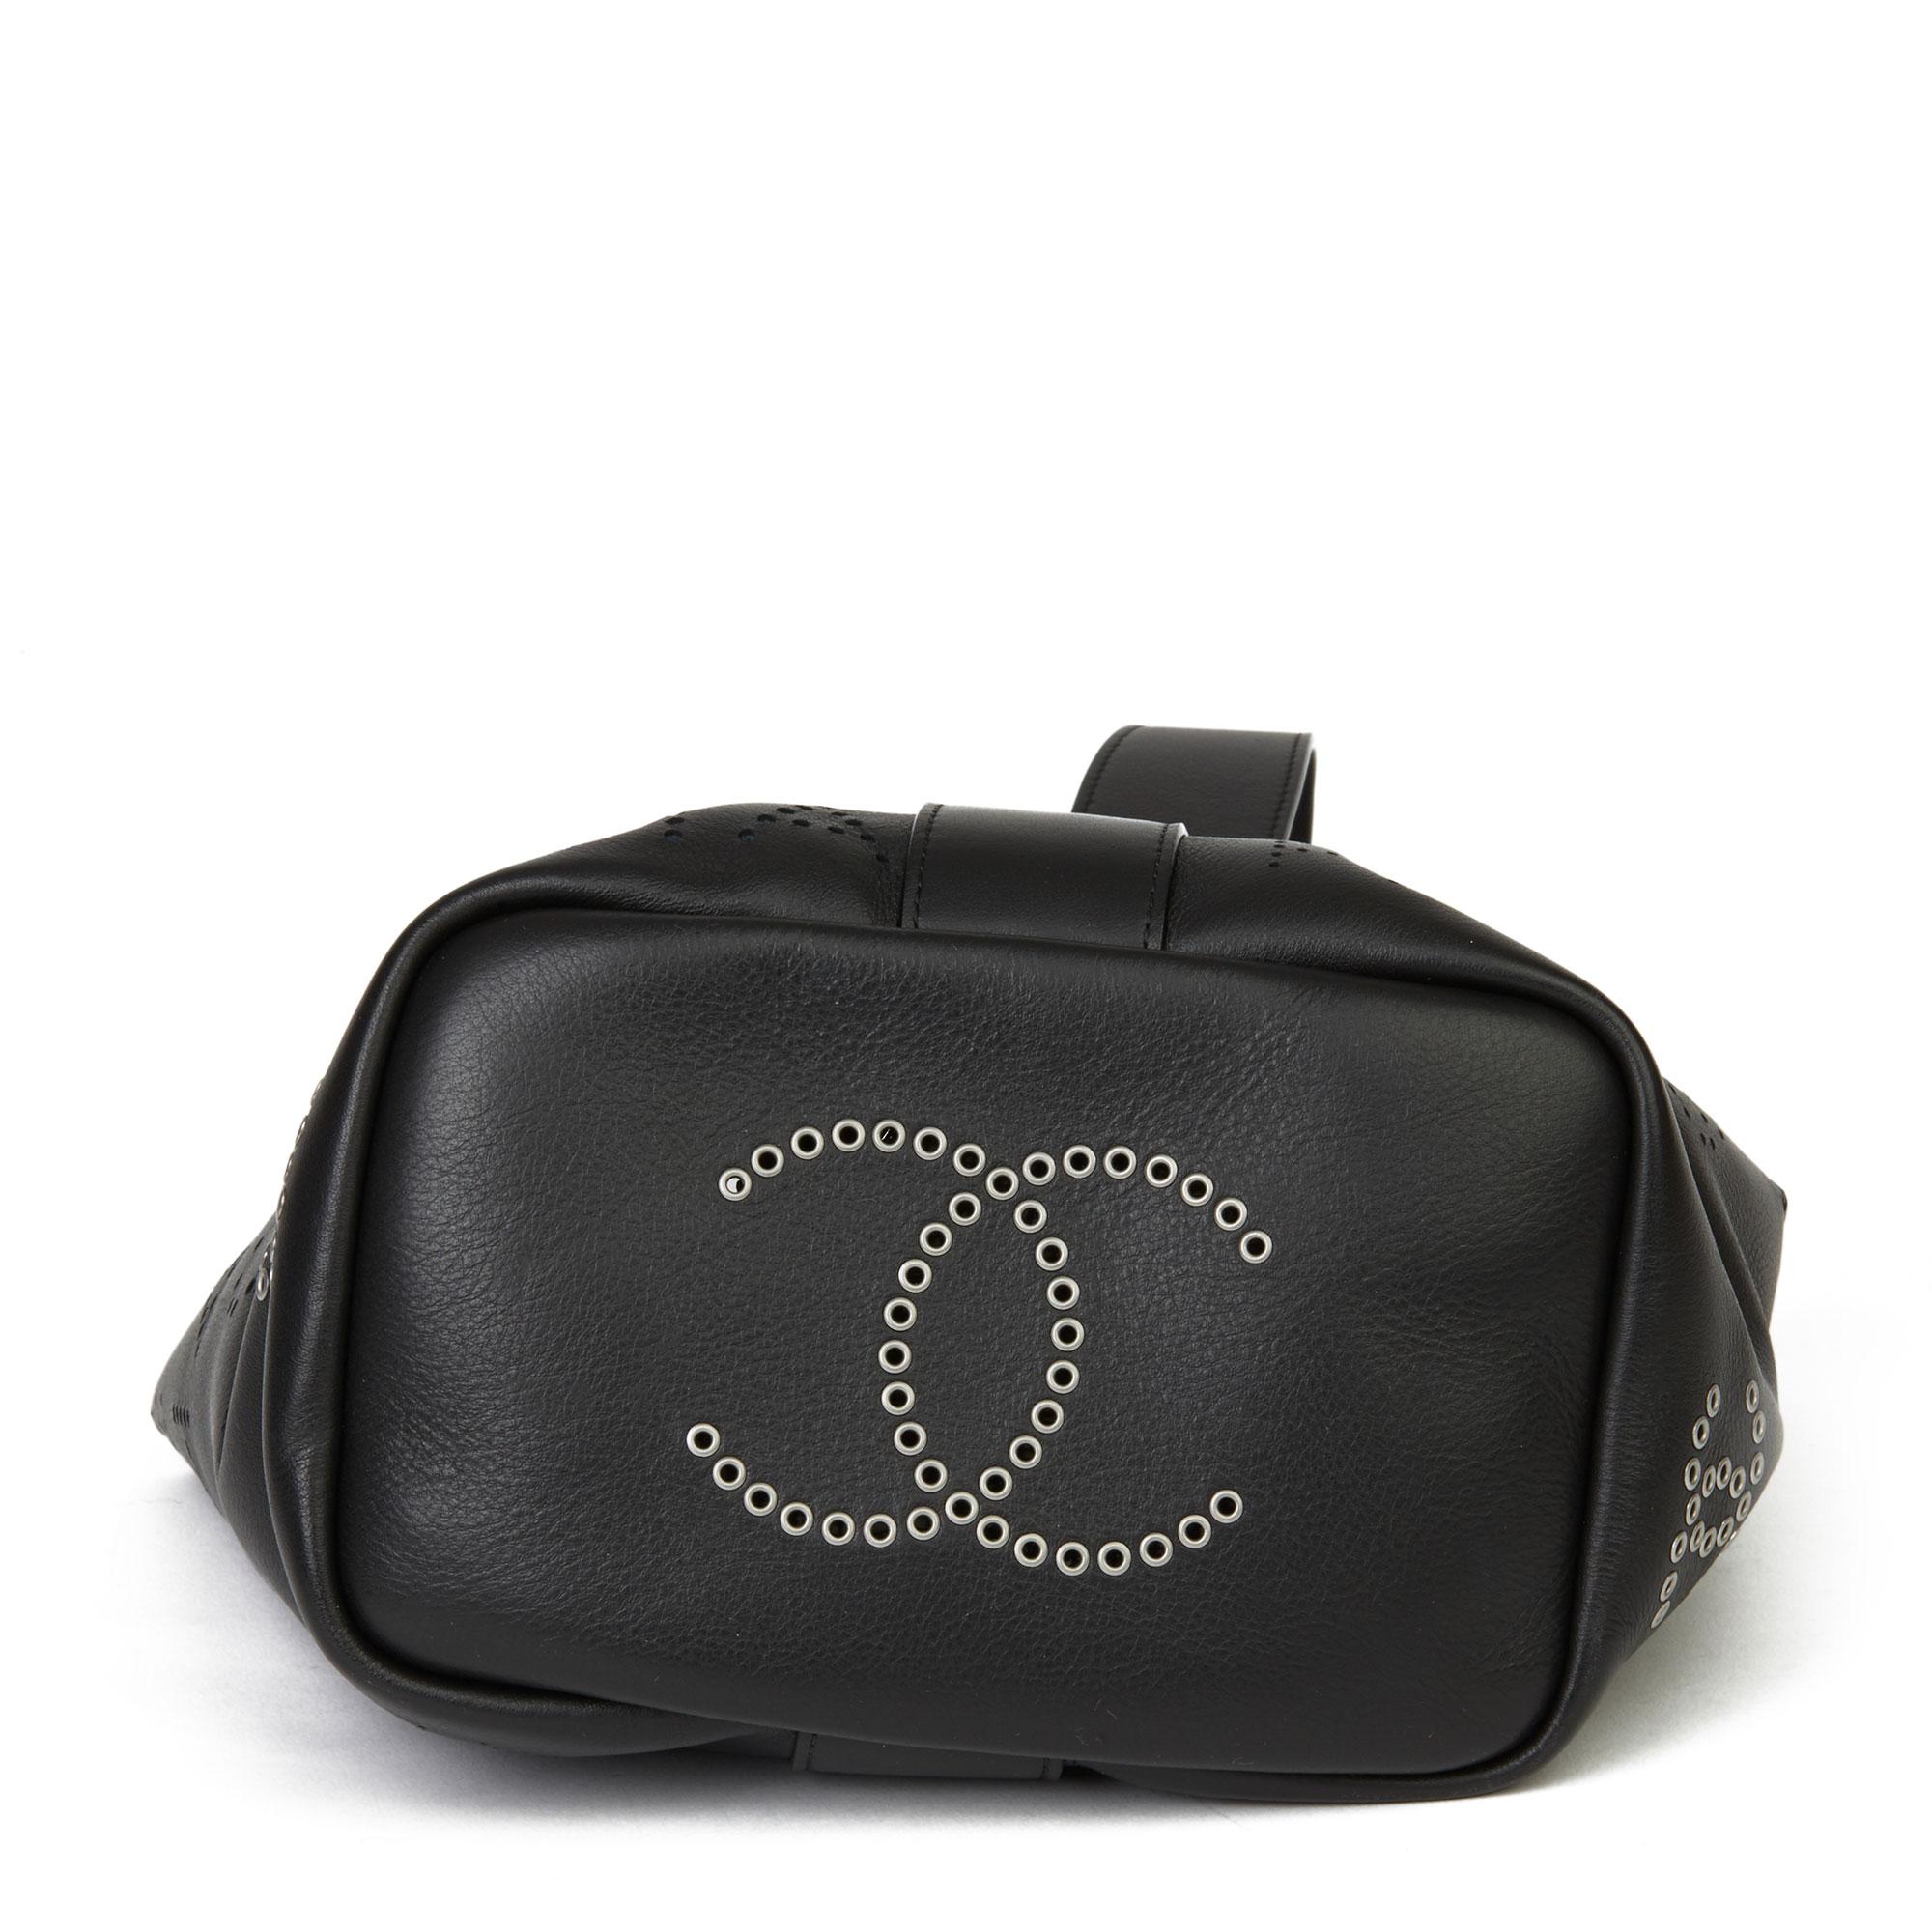 2019 Chanel Black Perforated Calfskin Logo Eyelets Bucket Bag with Tweed Pouch In Excellent Condition In Bishop's Stortford, Hertfordshire